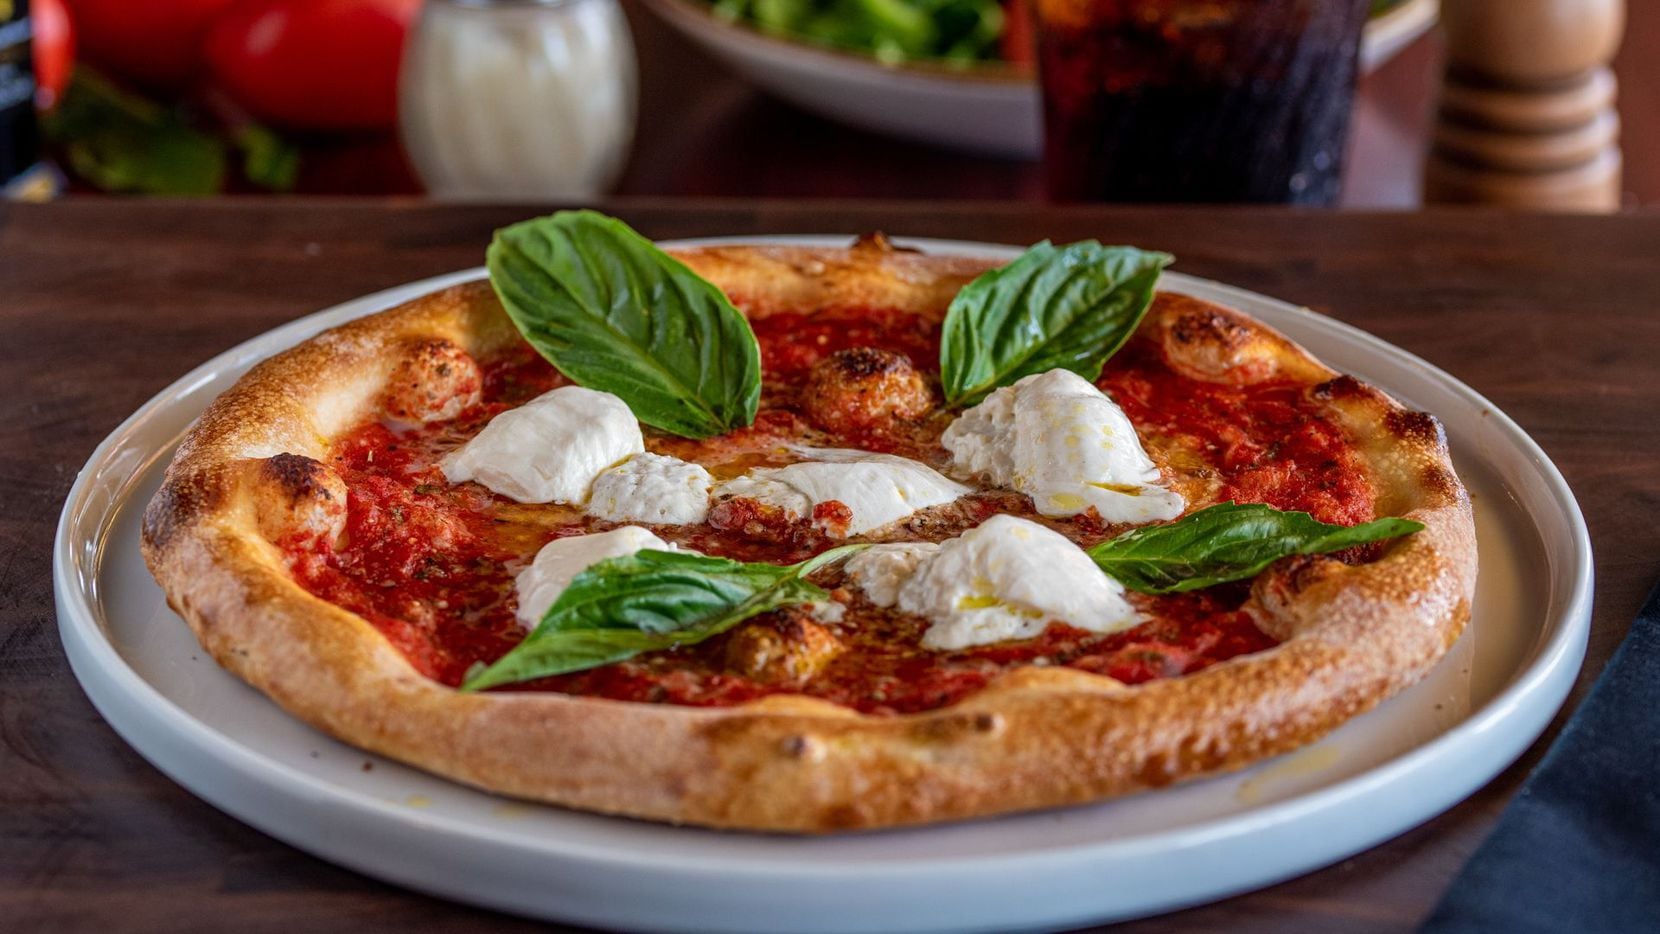 Russo's New York Pizzeria features traditional recipes.